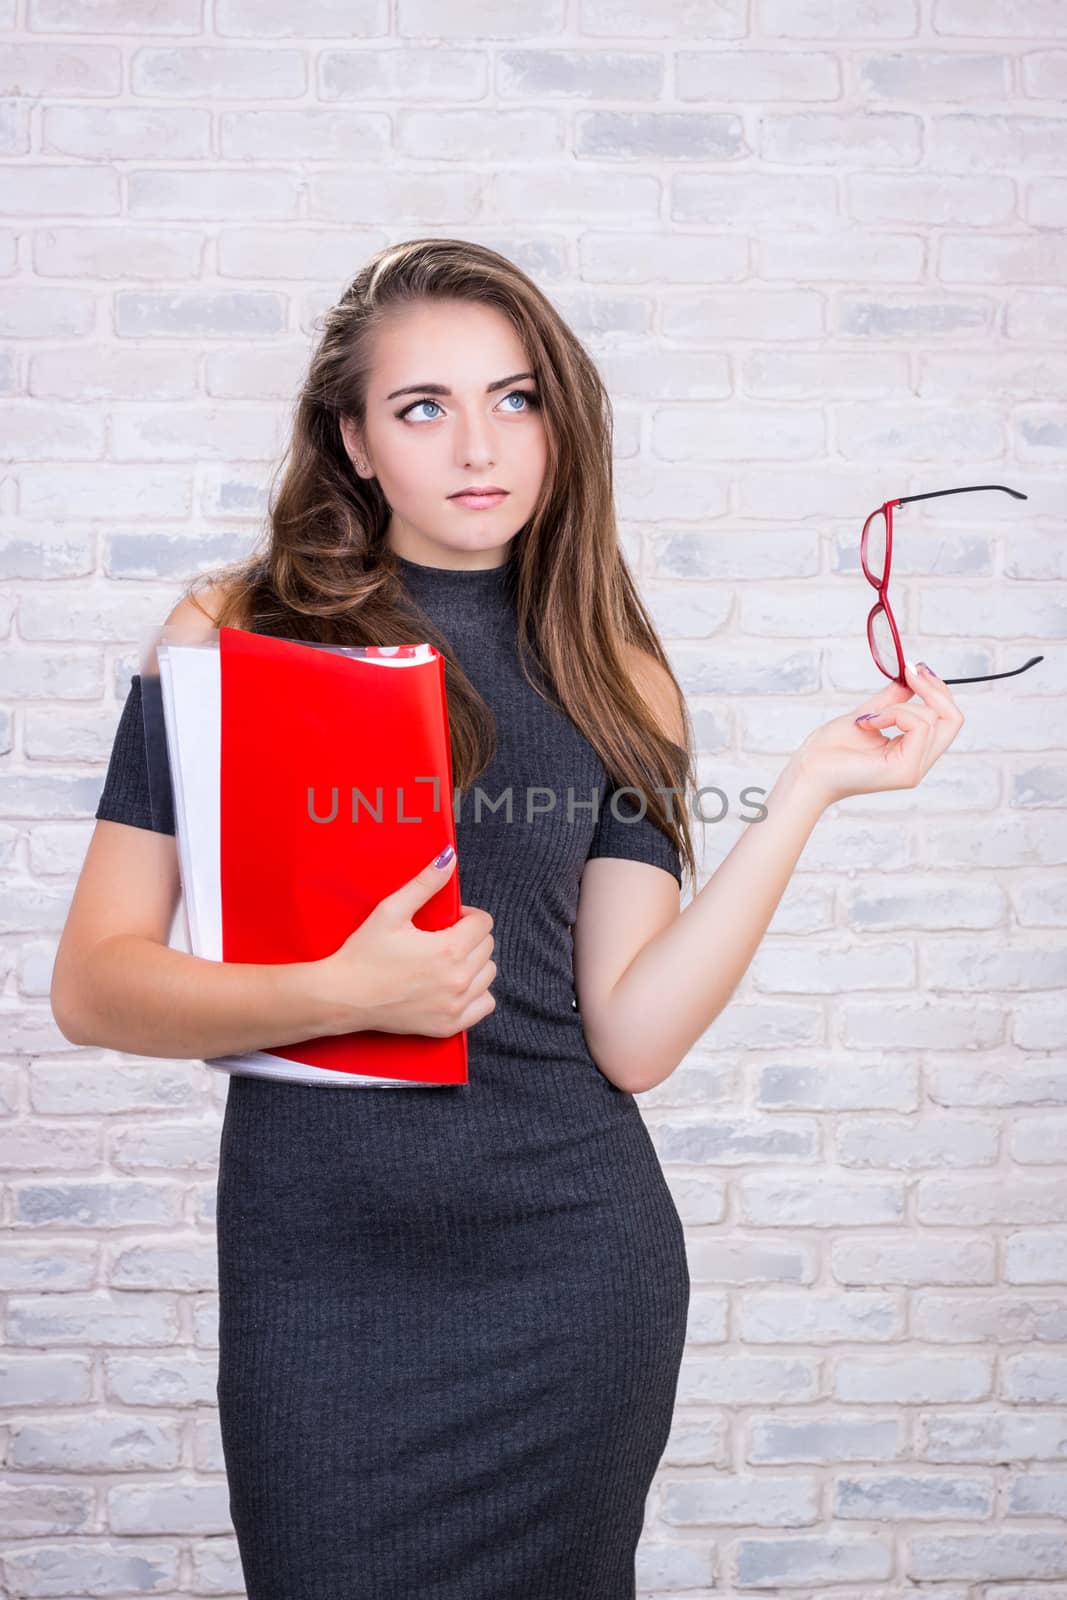 Long-haired girl imitates  office manager with red folder by VeraVerano